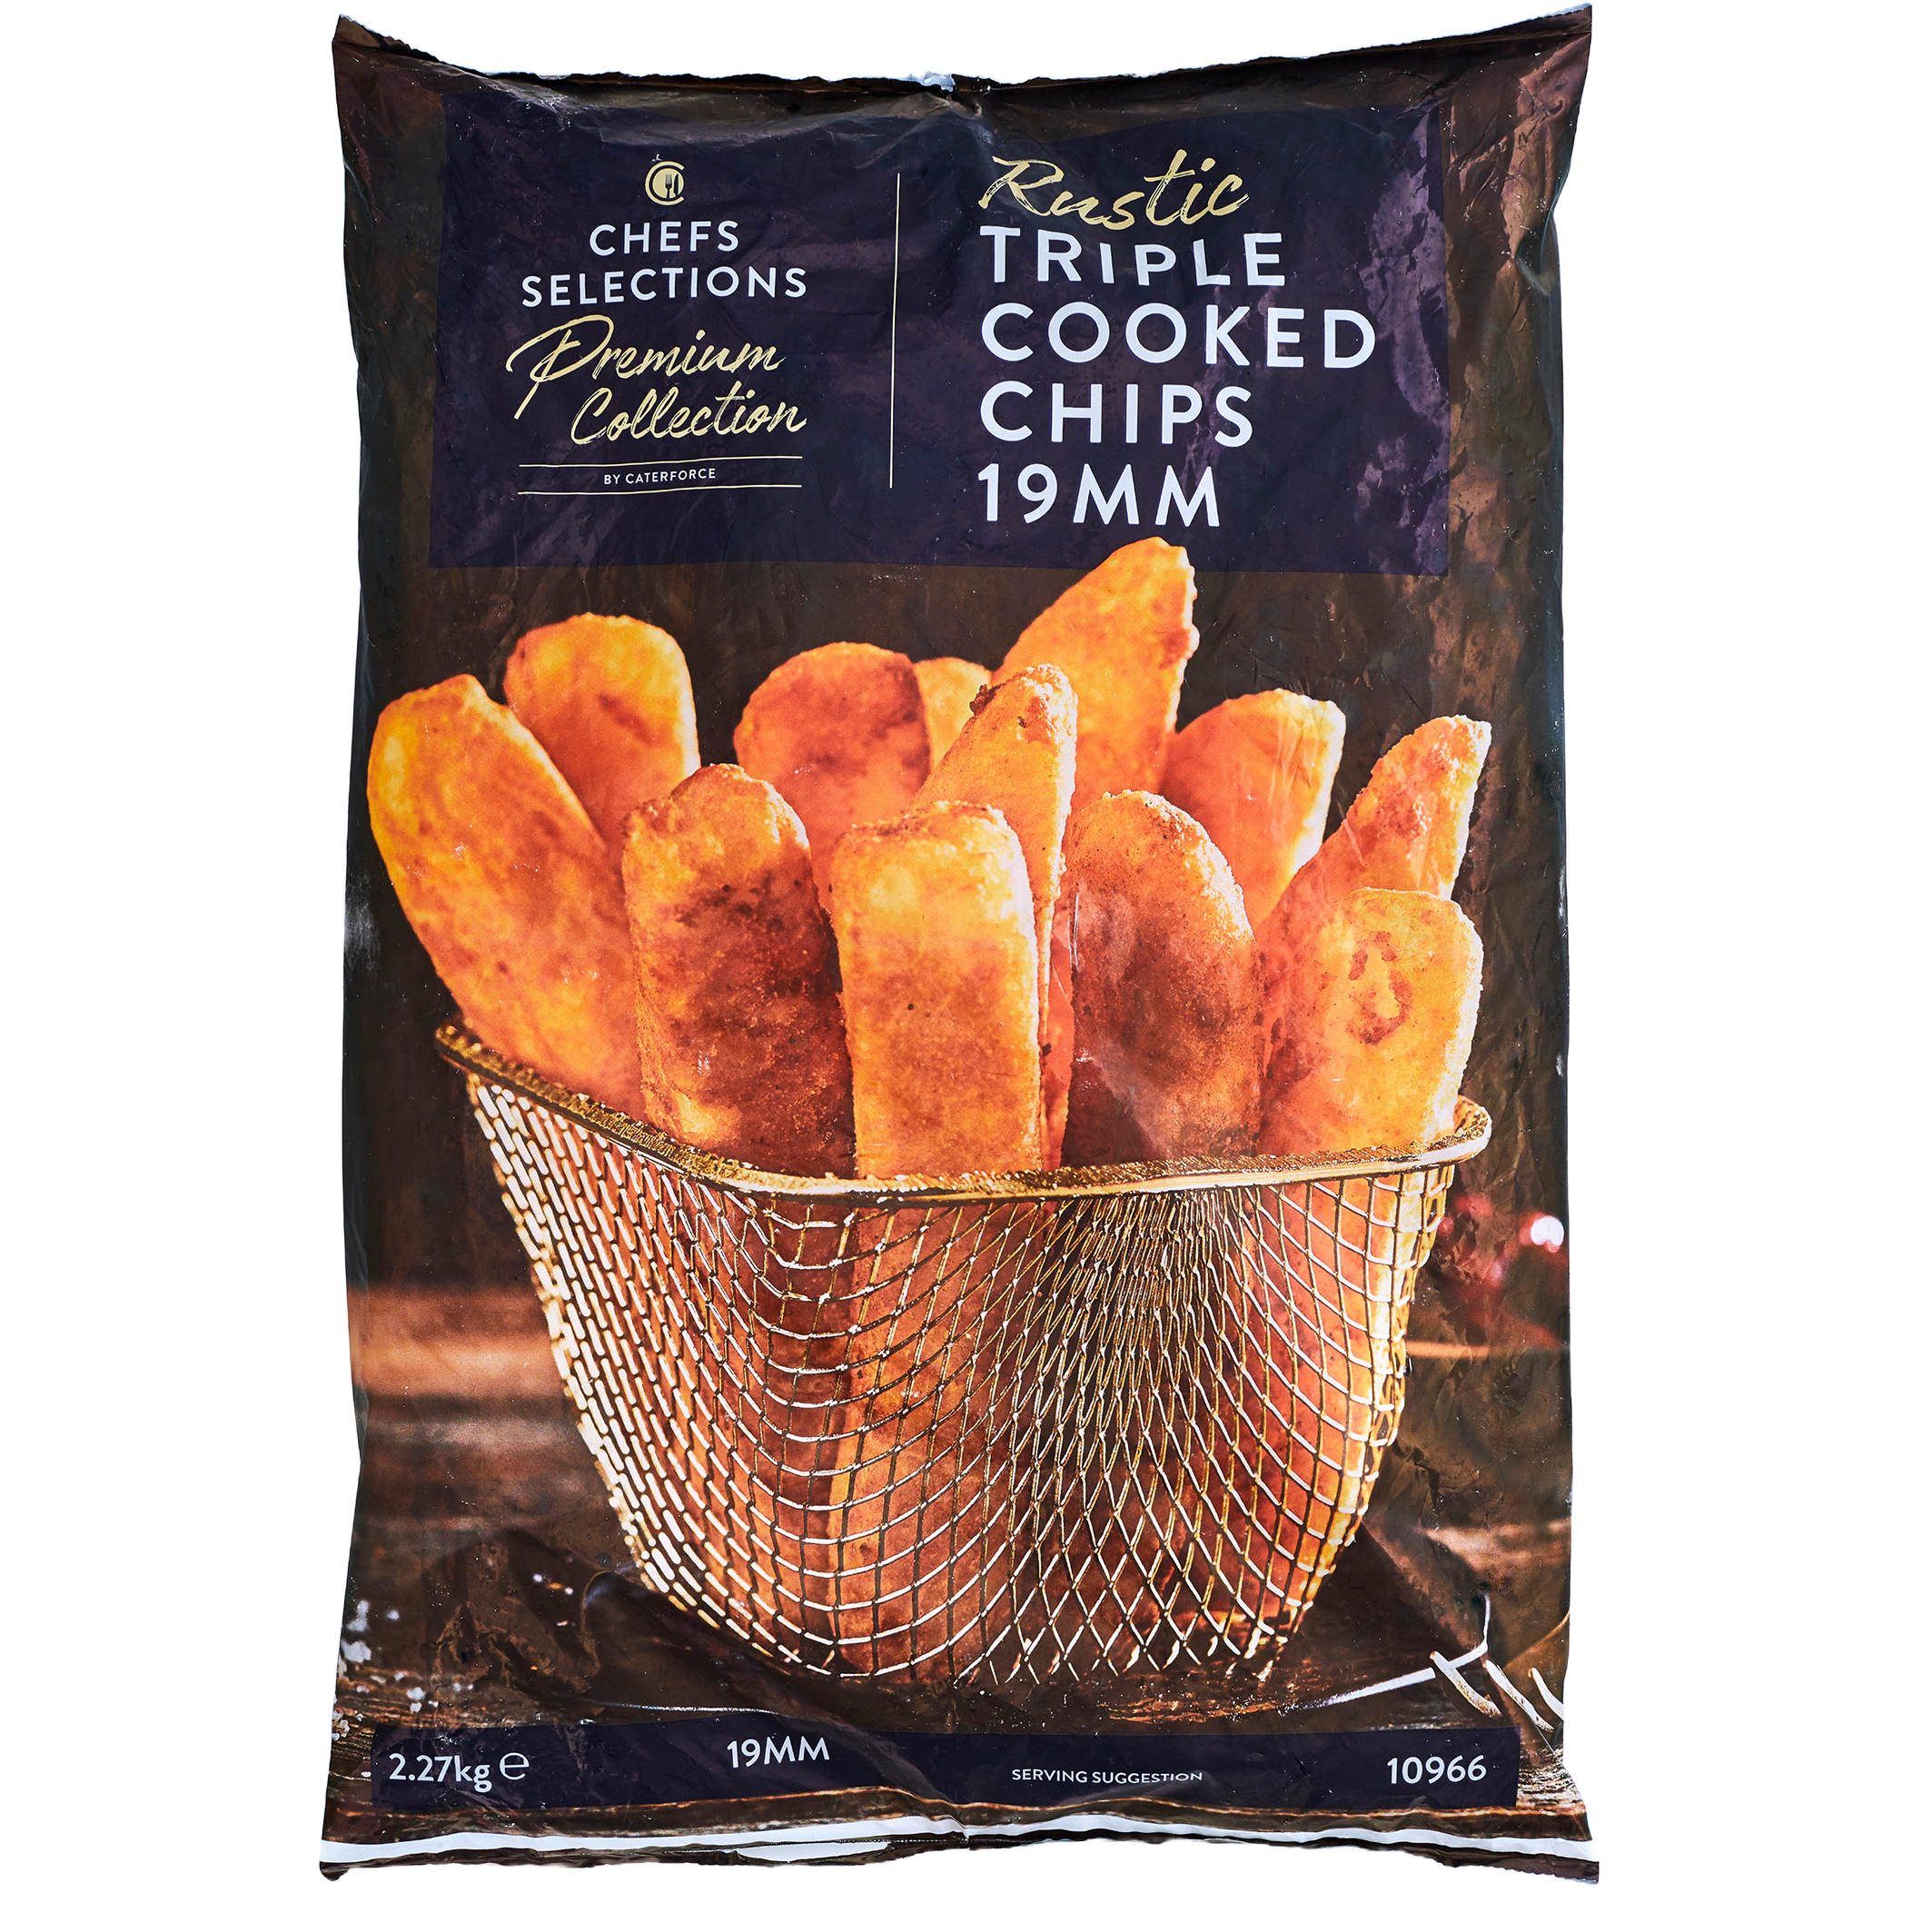 Chefs’ Selections Premium Triple Cooked Rustic Chips 19mm (4 x 2.27kg)